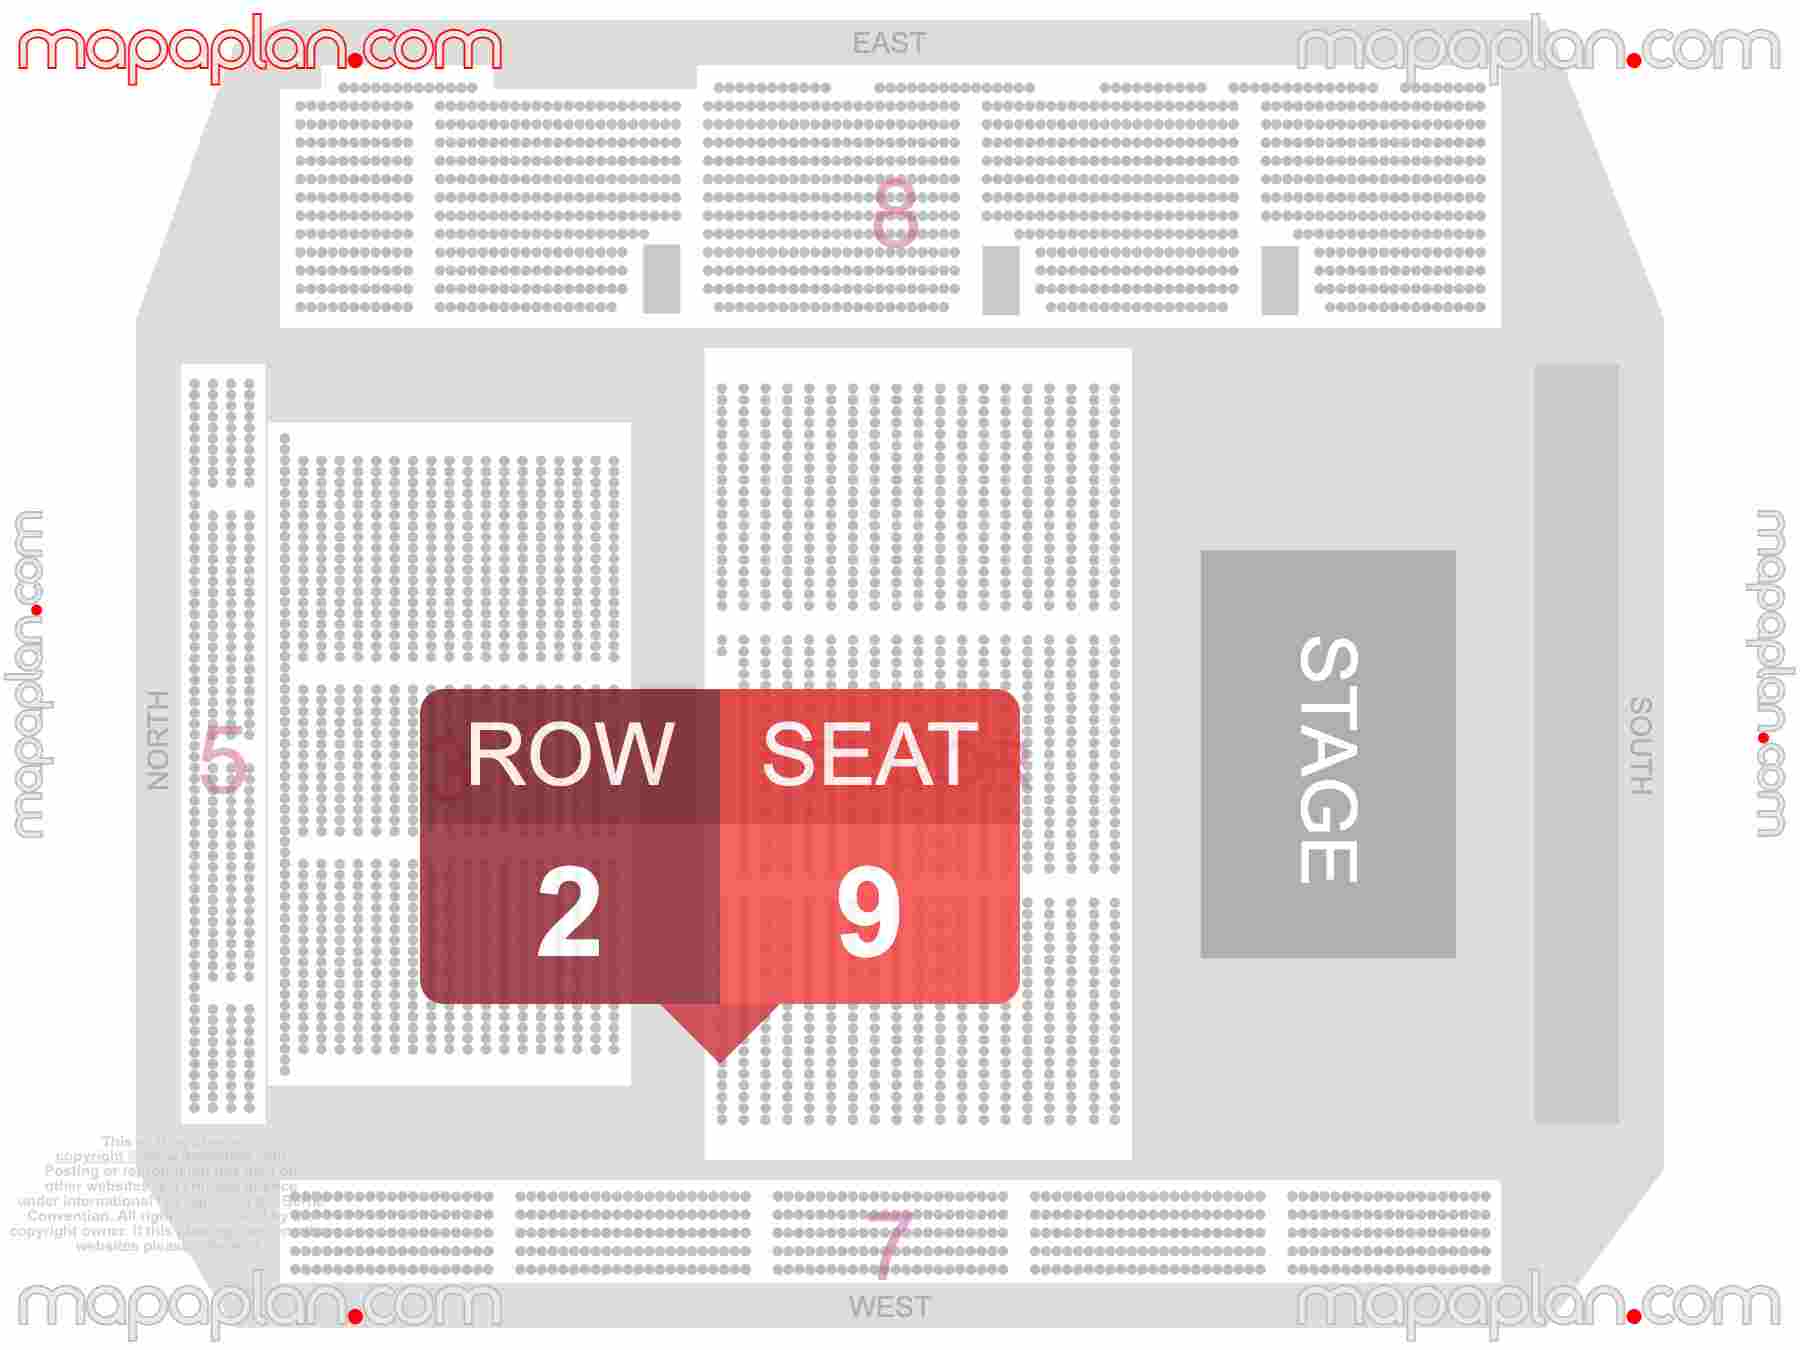 Wellington TSB Arena seating map Concert detailed seat numbers and row numbering map with interactive map plan layout